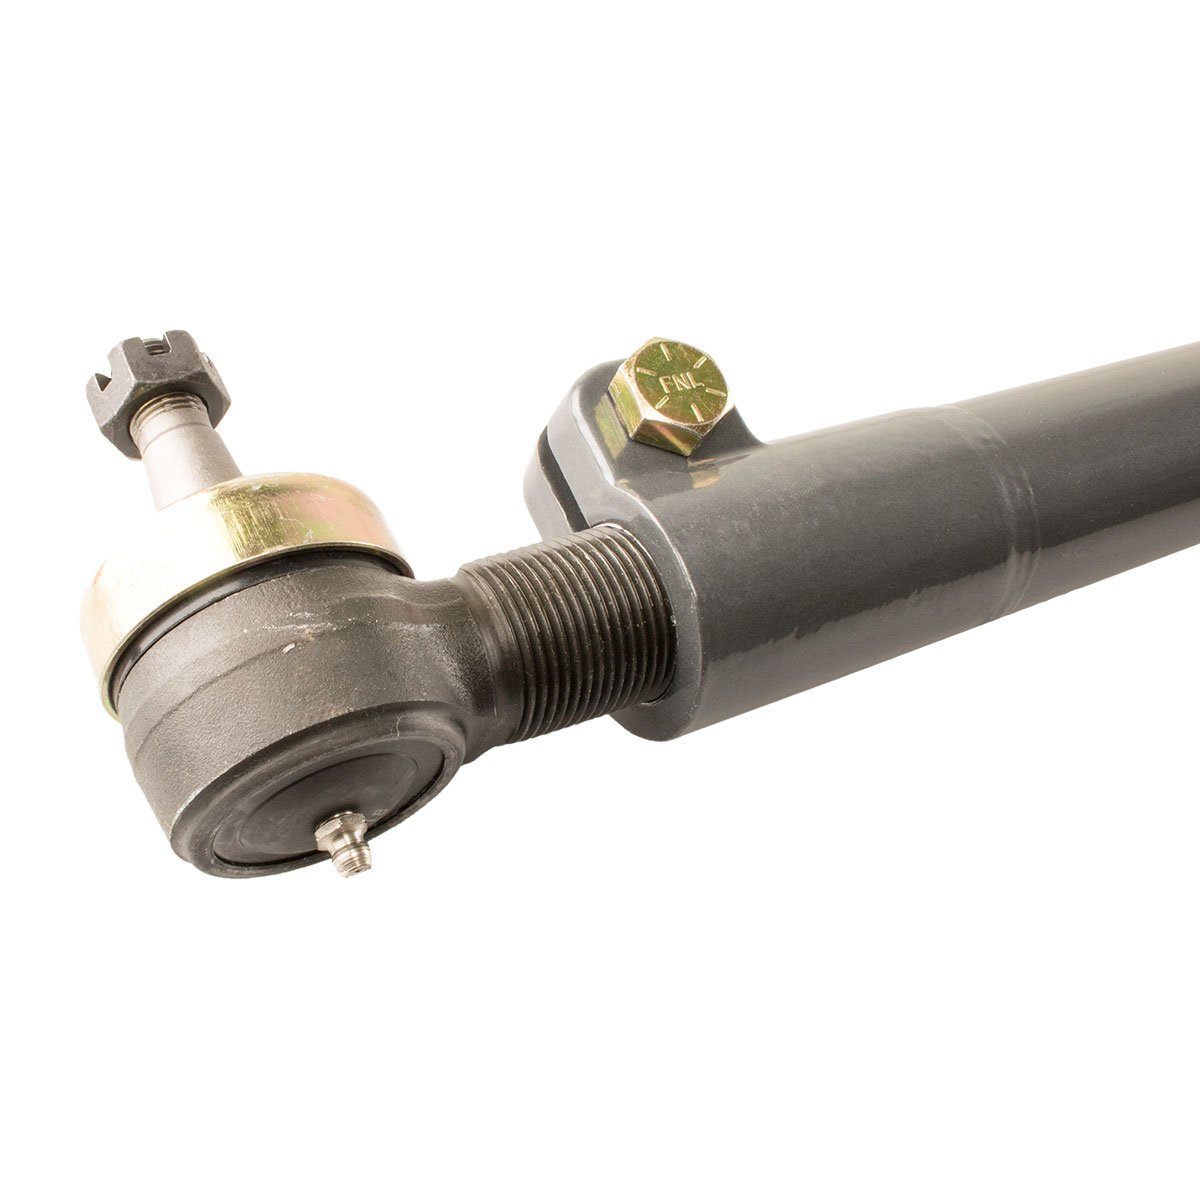 '13-23 Dodge Ram 2500/3500 Heavy Duty Tie Rod Suspension Synergy Manufacturing close-up